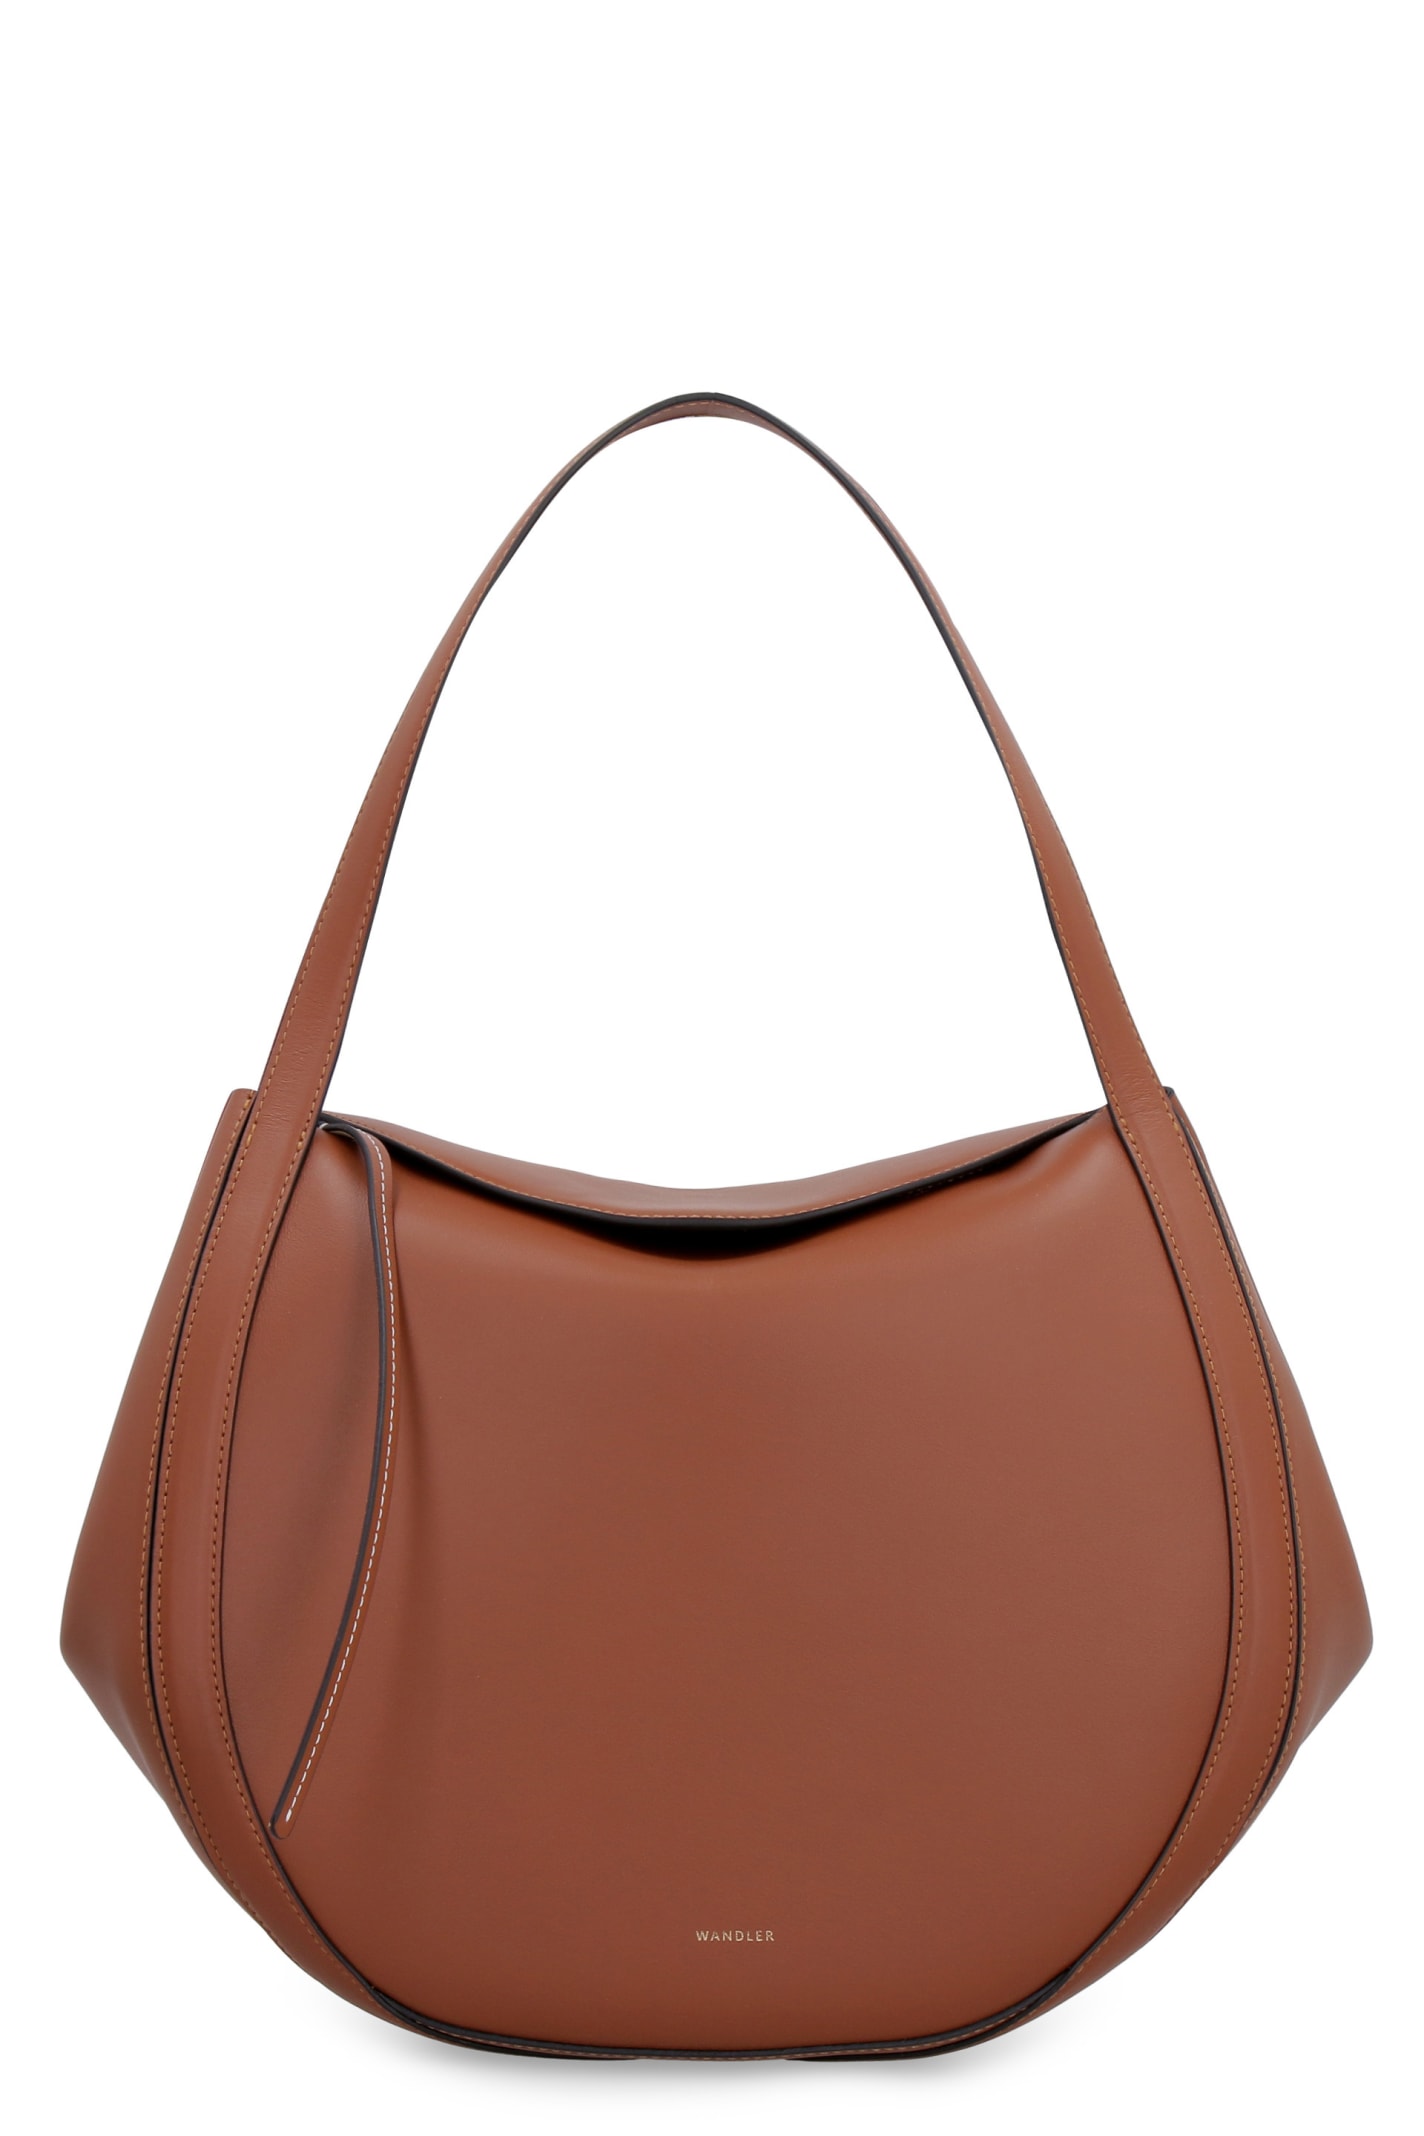 Wandler Lin Leather Tote